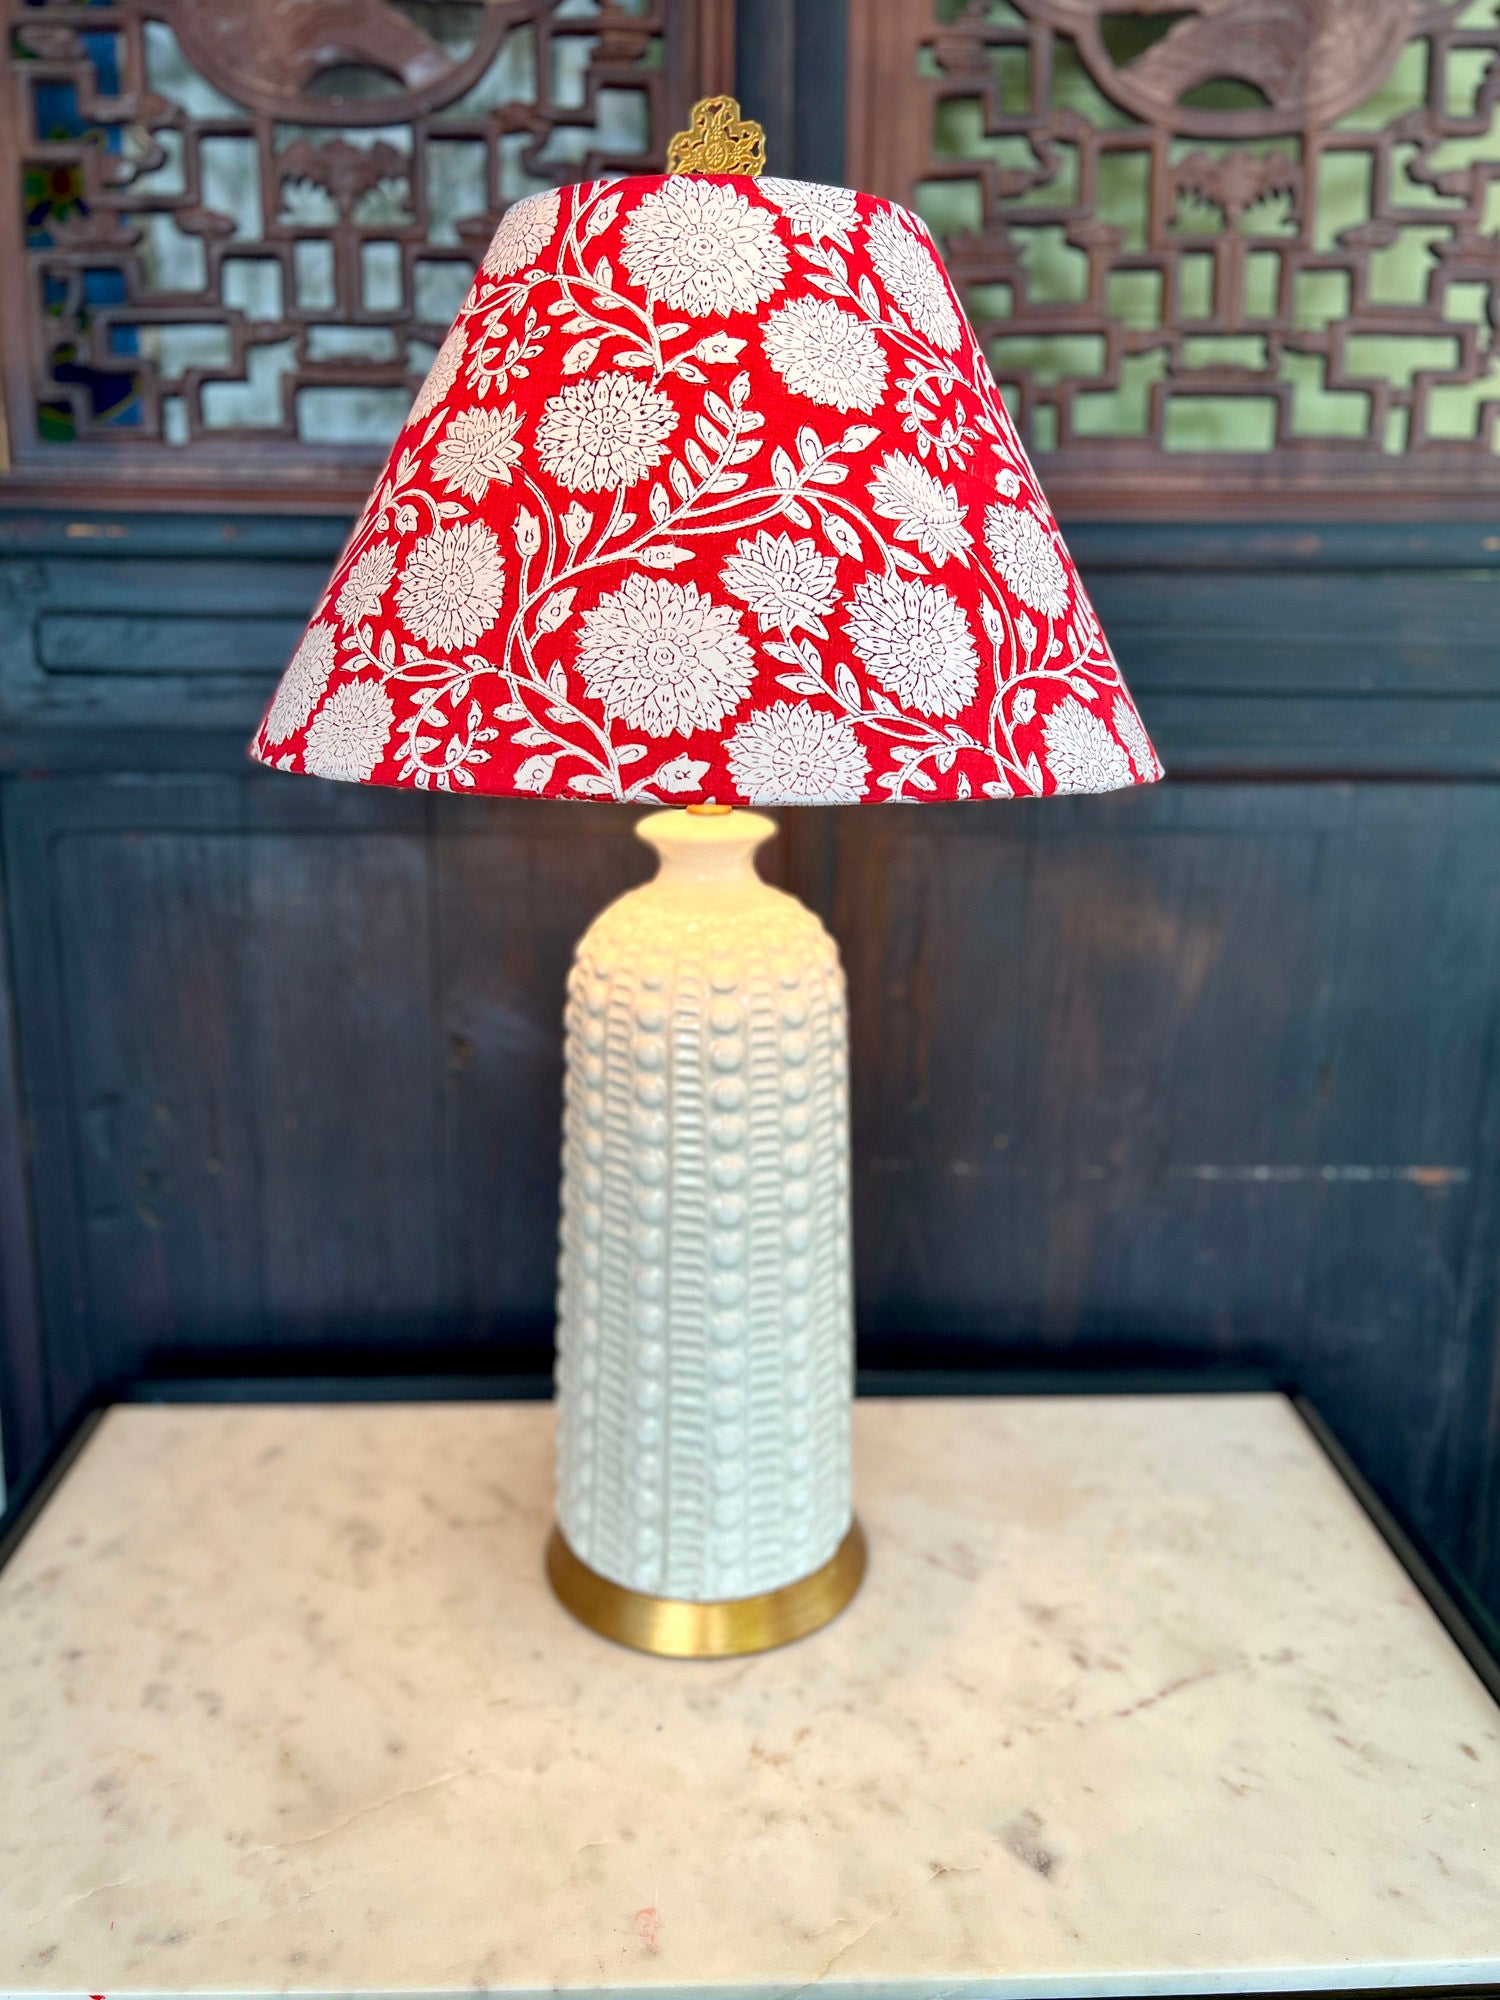 Angelica / Red and White Floral Block Print Empire Lamp Shade